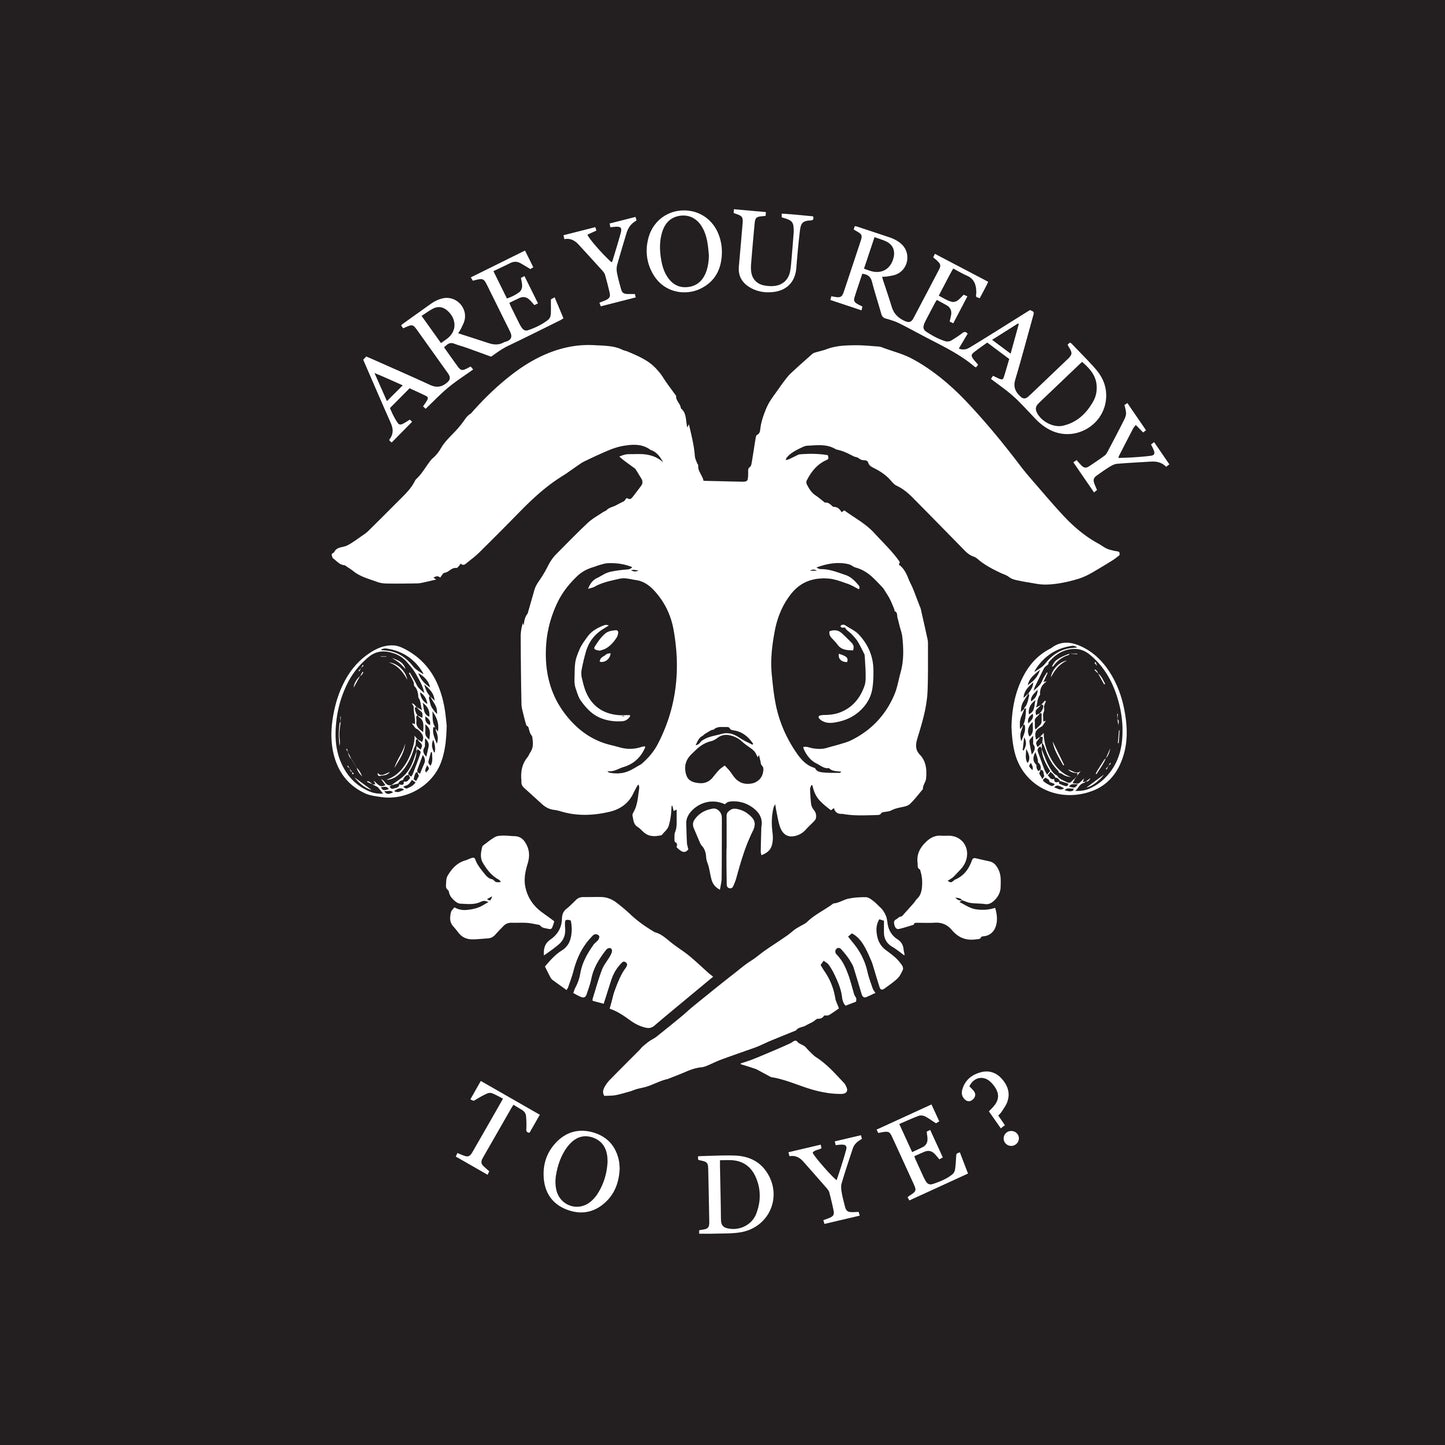 Are You Ready To Dye?